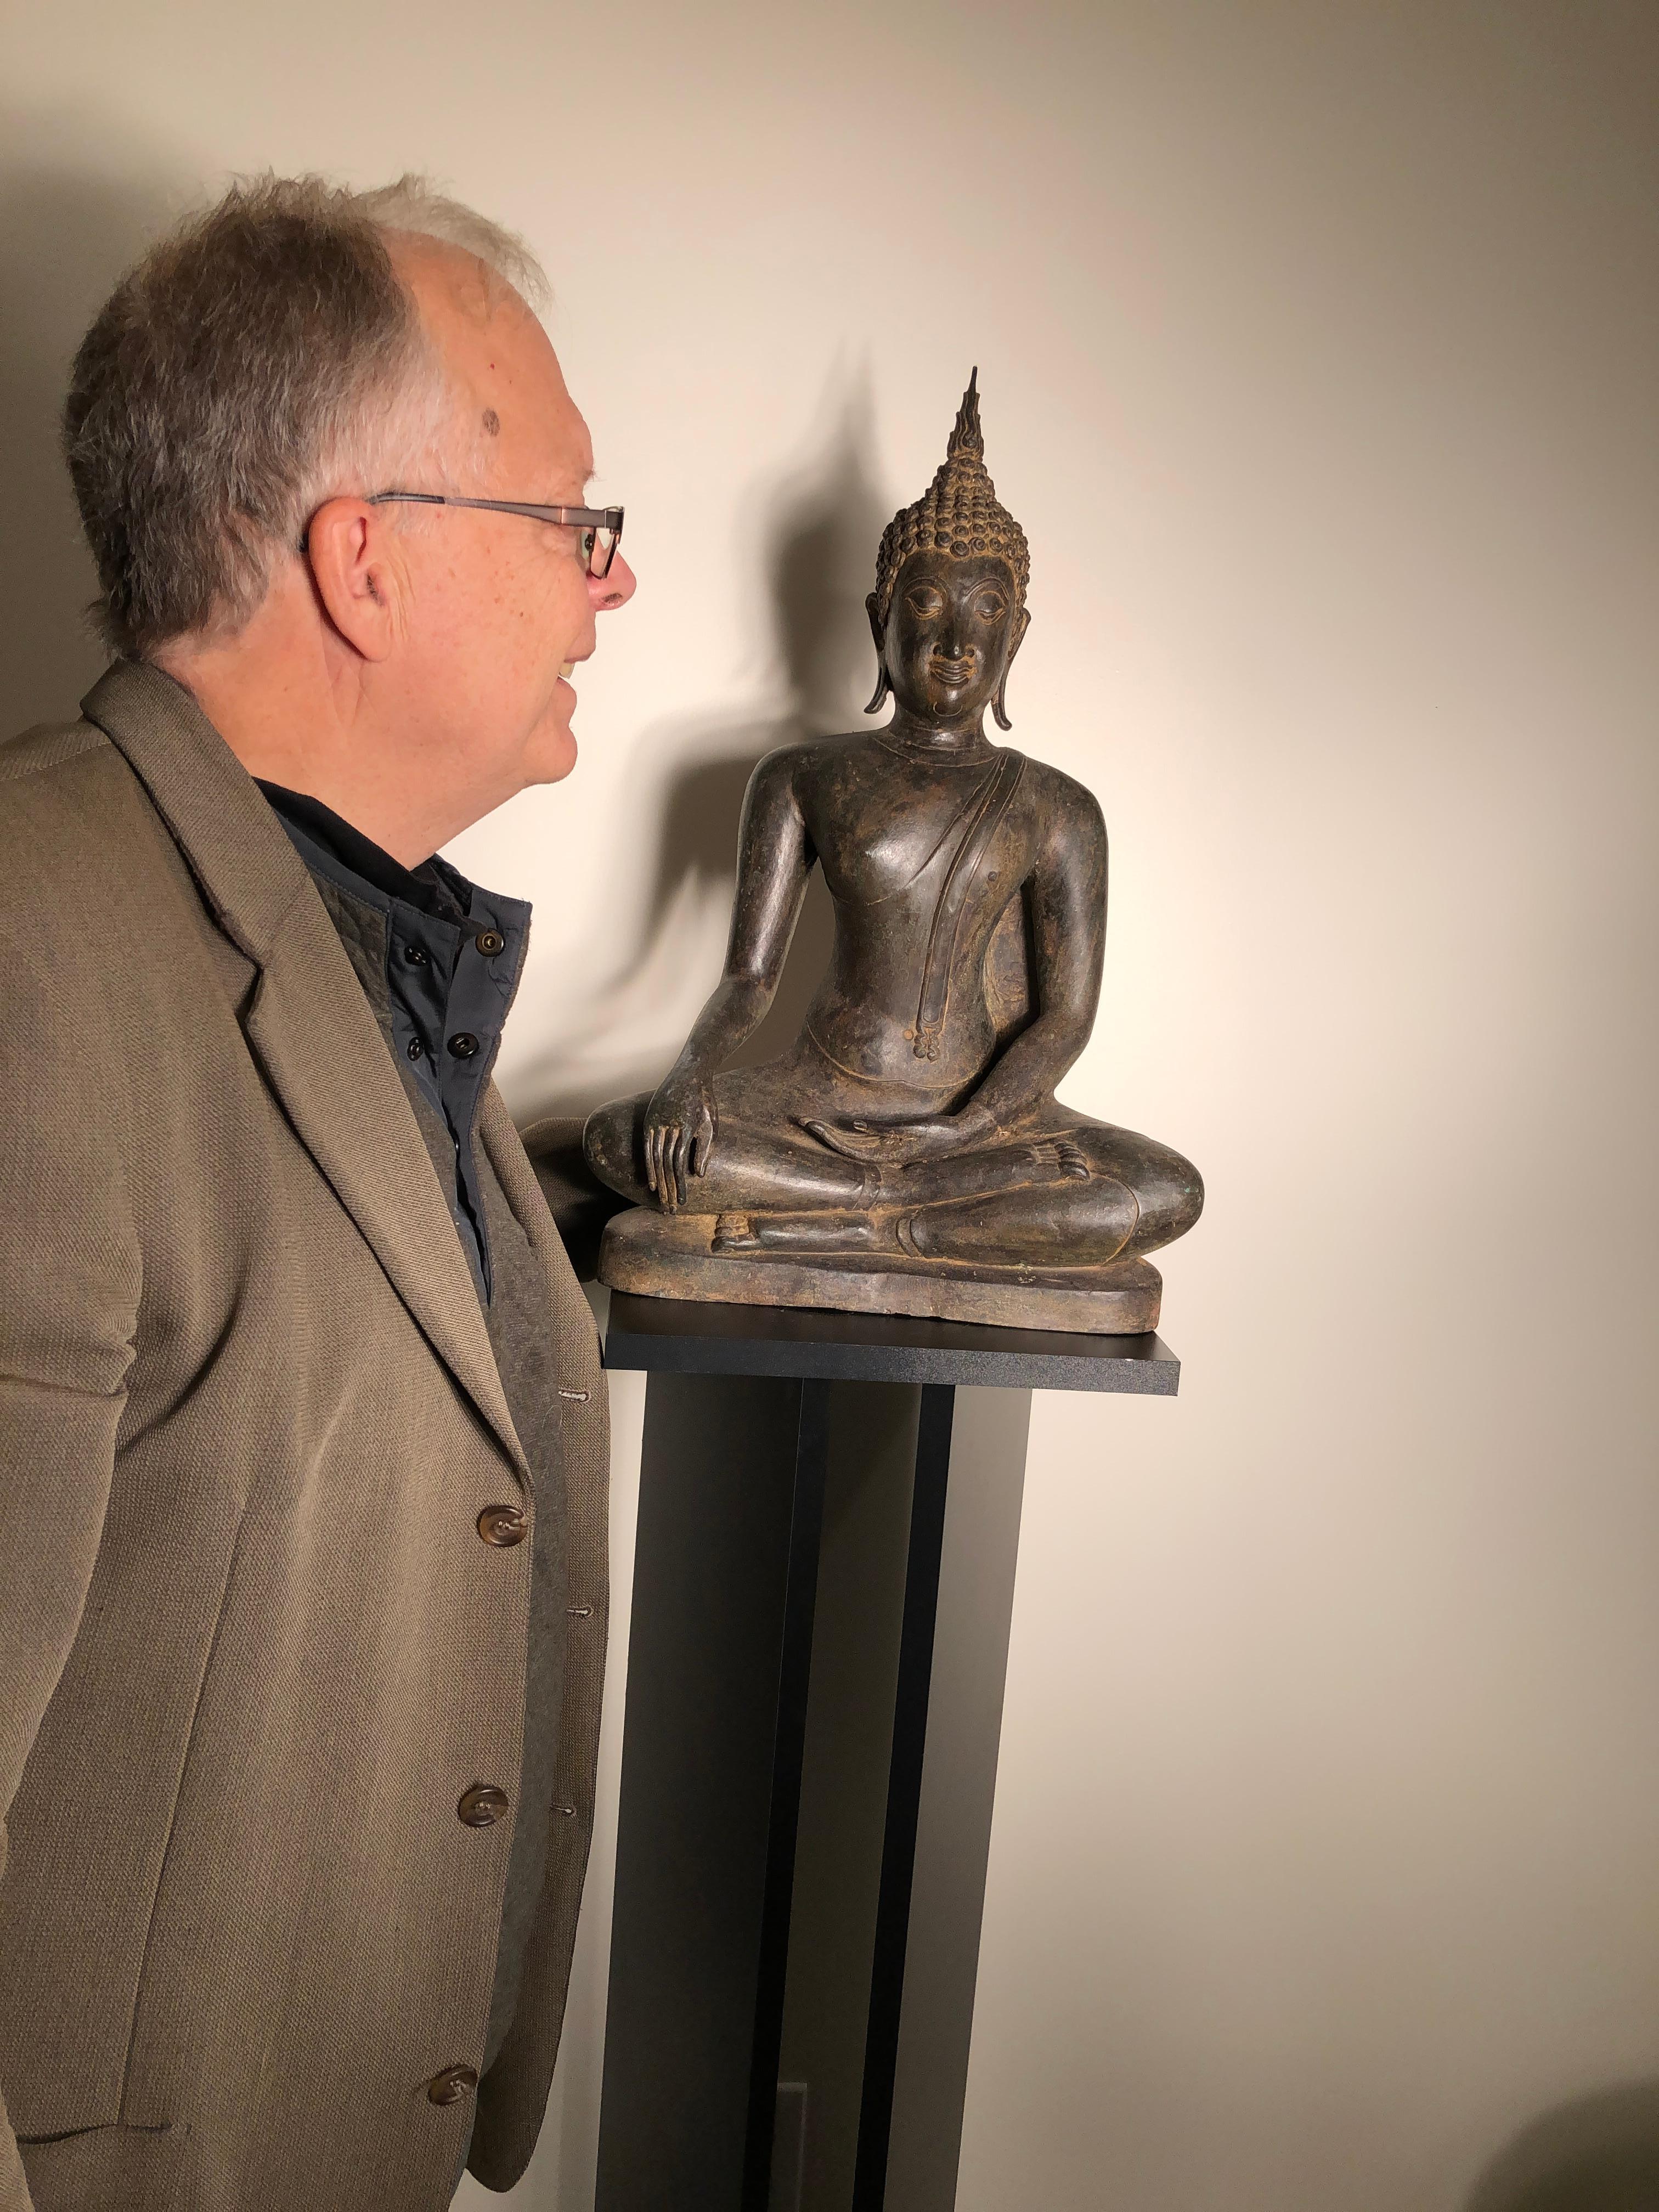 From a fifty year old UK Buddhist collection.

Thailand bronze Buddha 18th century Sukhothai Enlightenment Buddha. 

This beautiful Buddha sculpture will bring serenity and timeless style to your home, office, sacred, or garden space. 

The